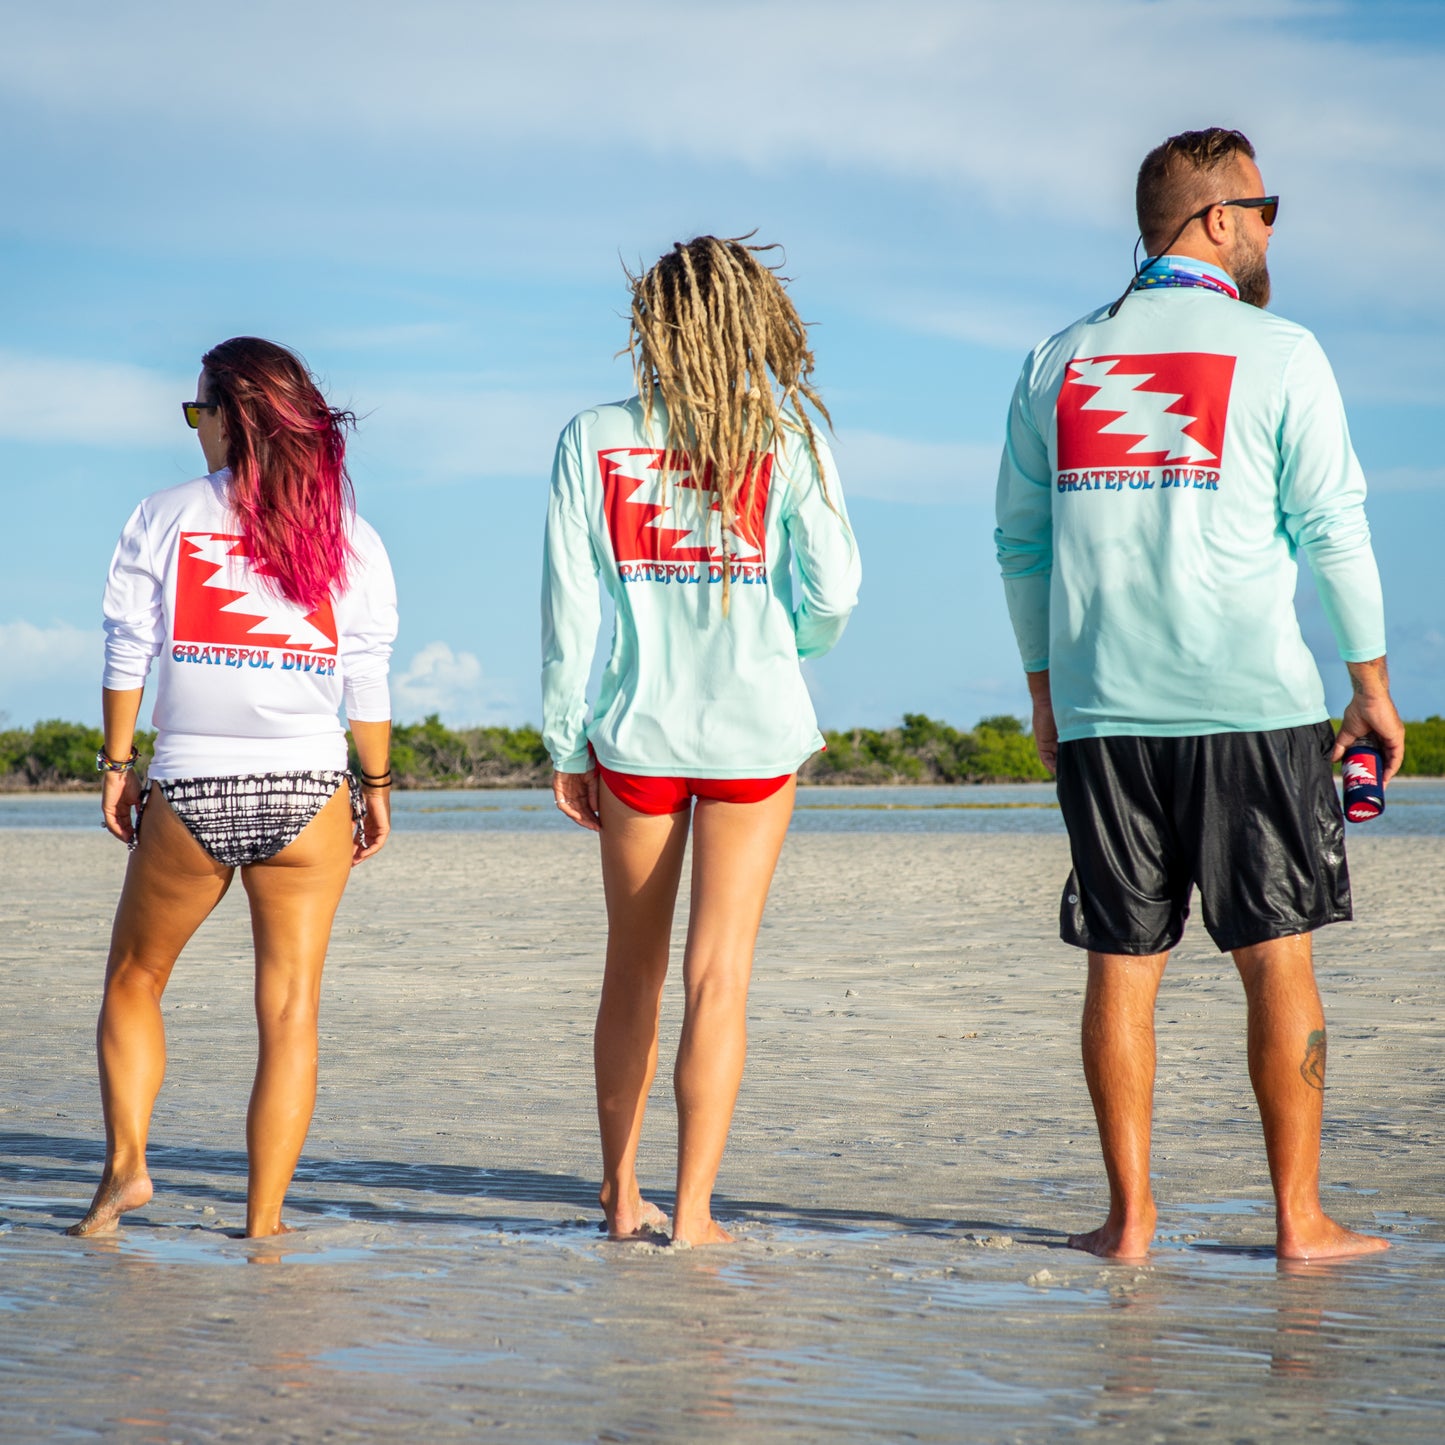 Grateful Diver Classic UV Shirt in white and seagrass on three models back shots on sandbar